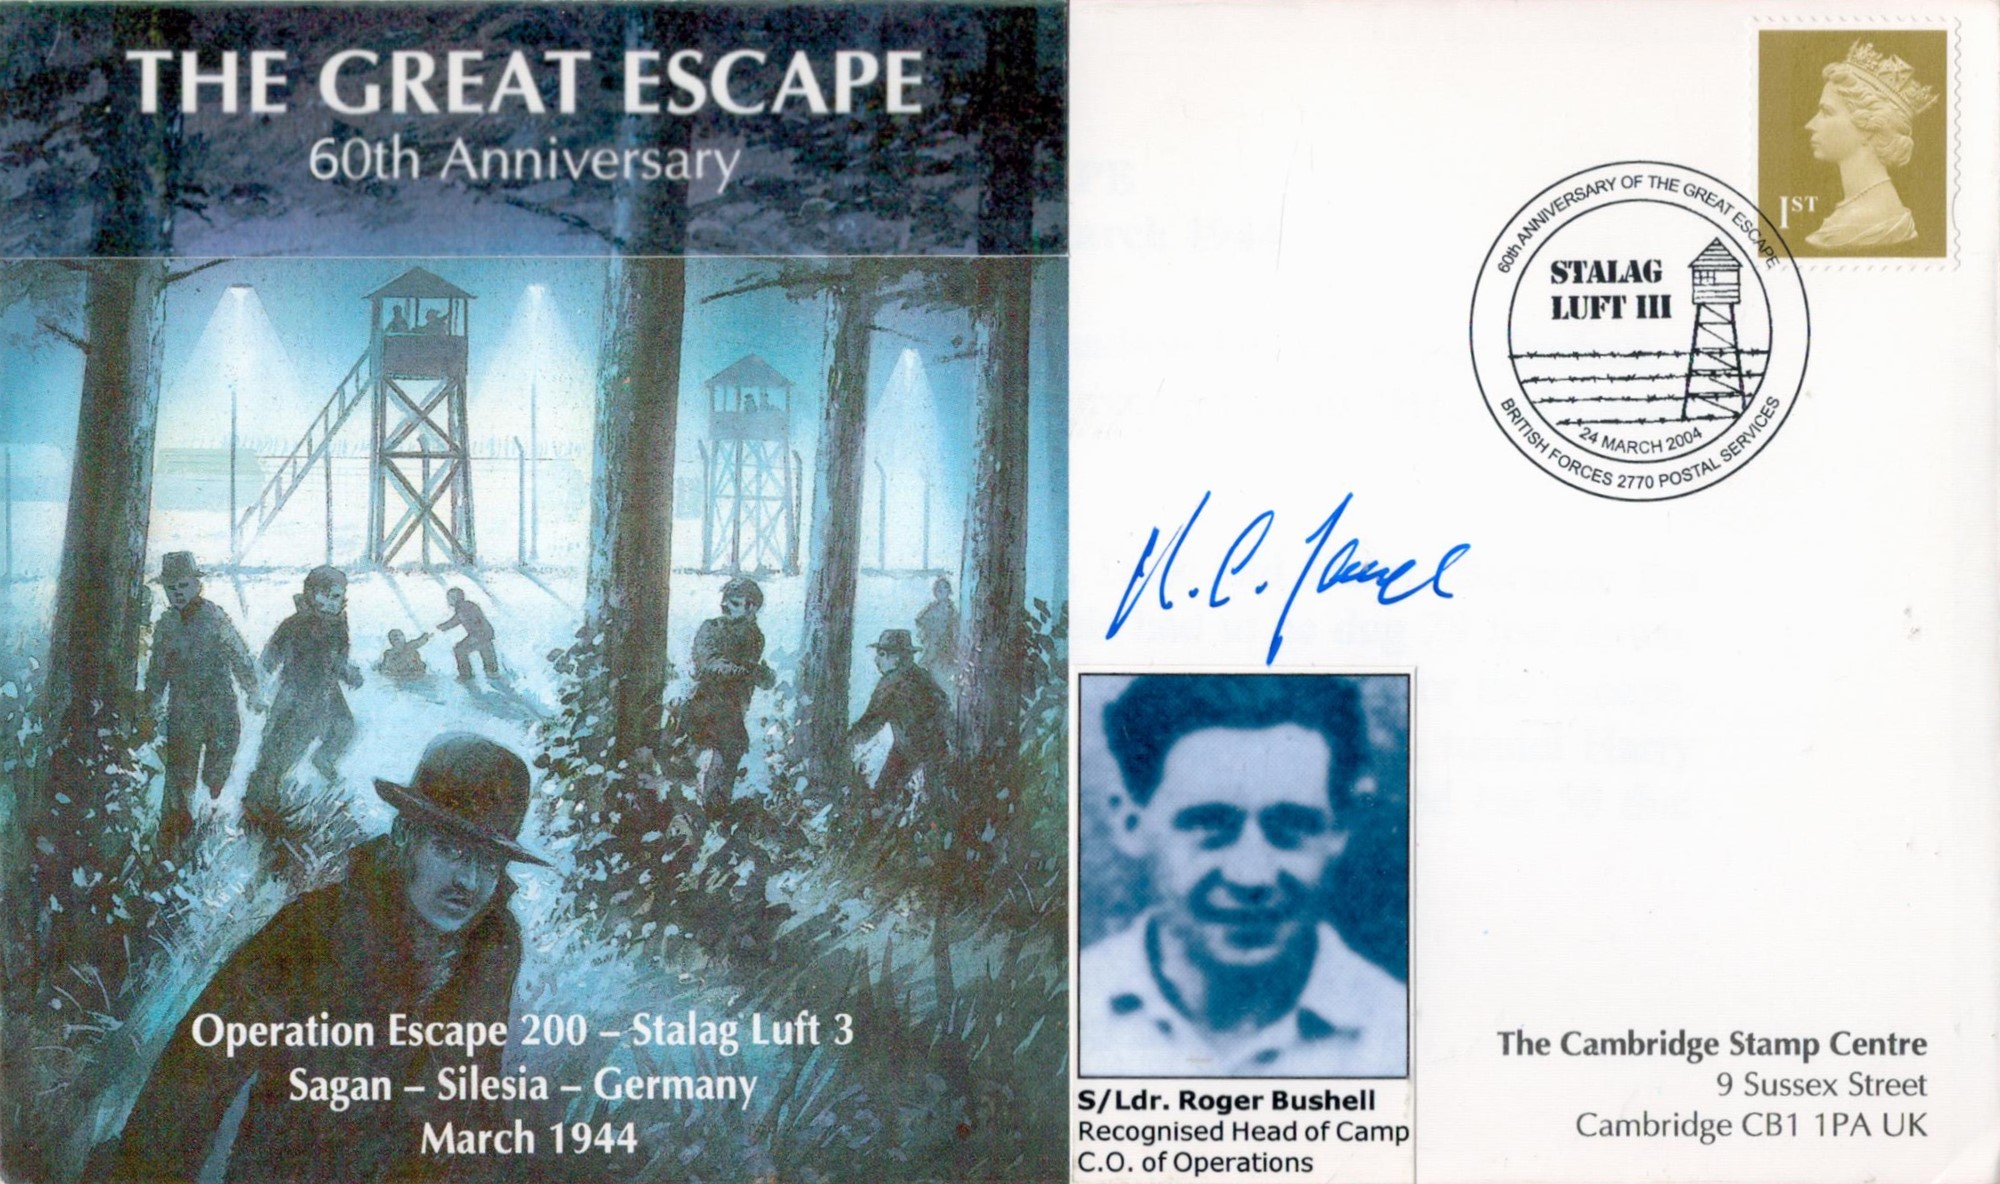 The Great Escape - 50th Anniversary, Operation Escape 200, Stalag Luft 3, Sagan – Silesia – Germany,